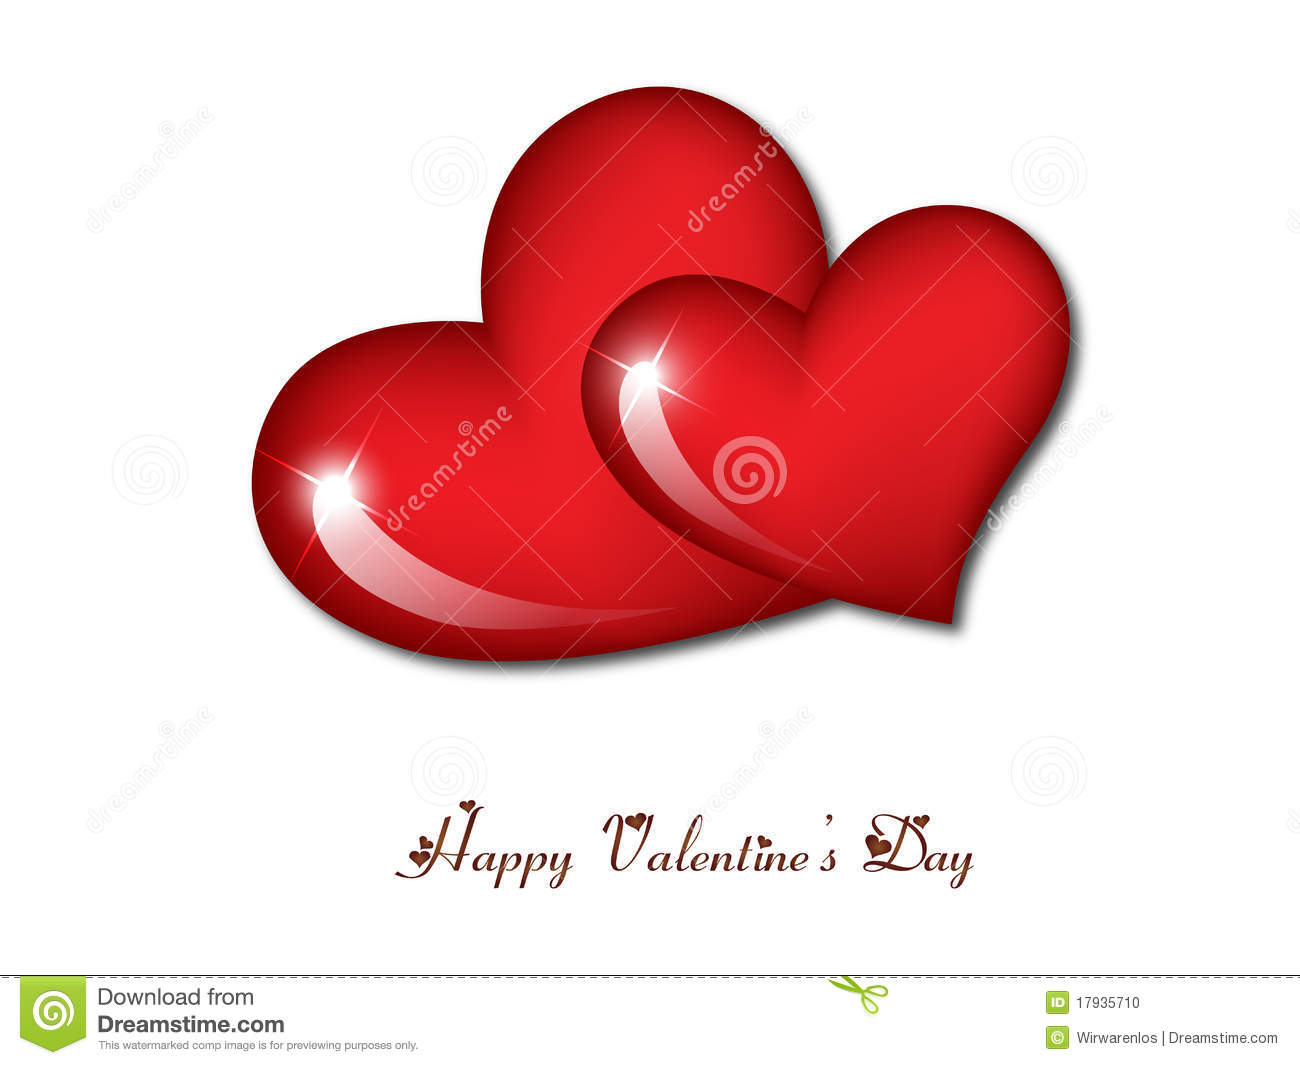 Happy Valentine's Day Two Red Hearts